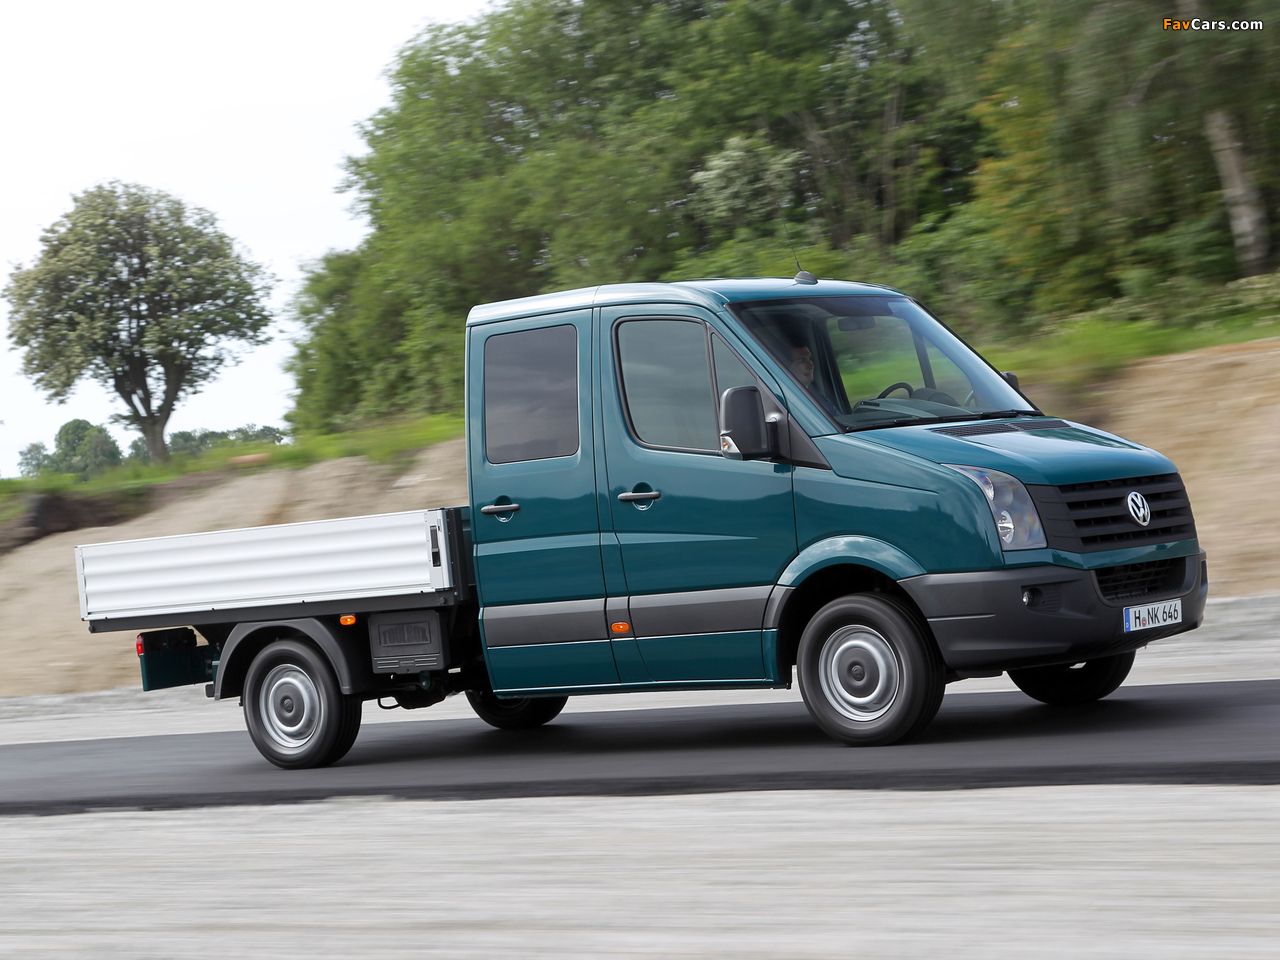 Volkswagen Crafter Double Cab Pickup 2011 pictures (1280 x 960)